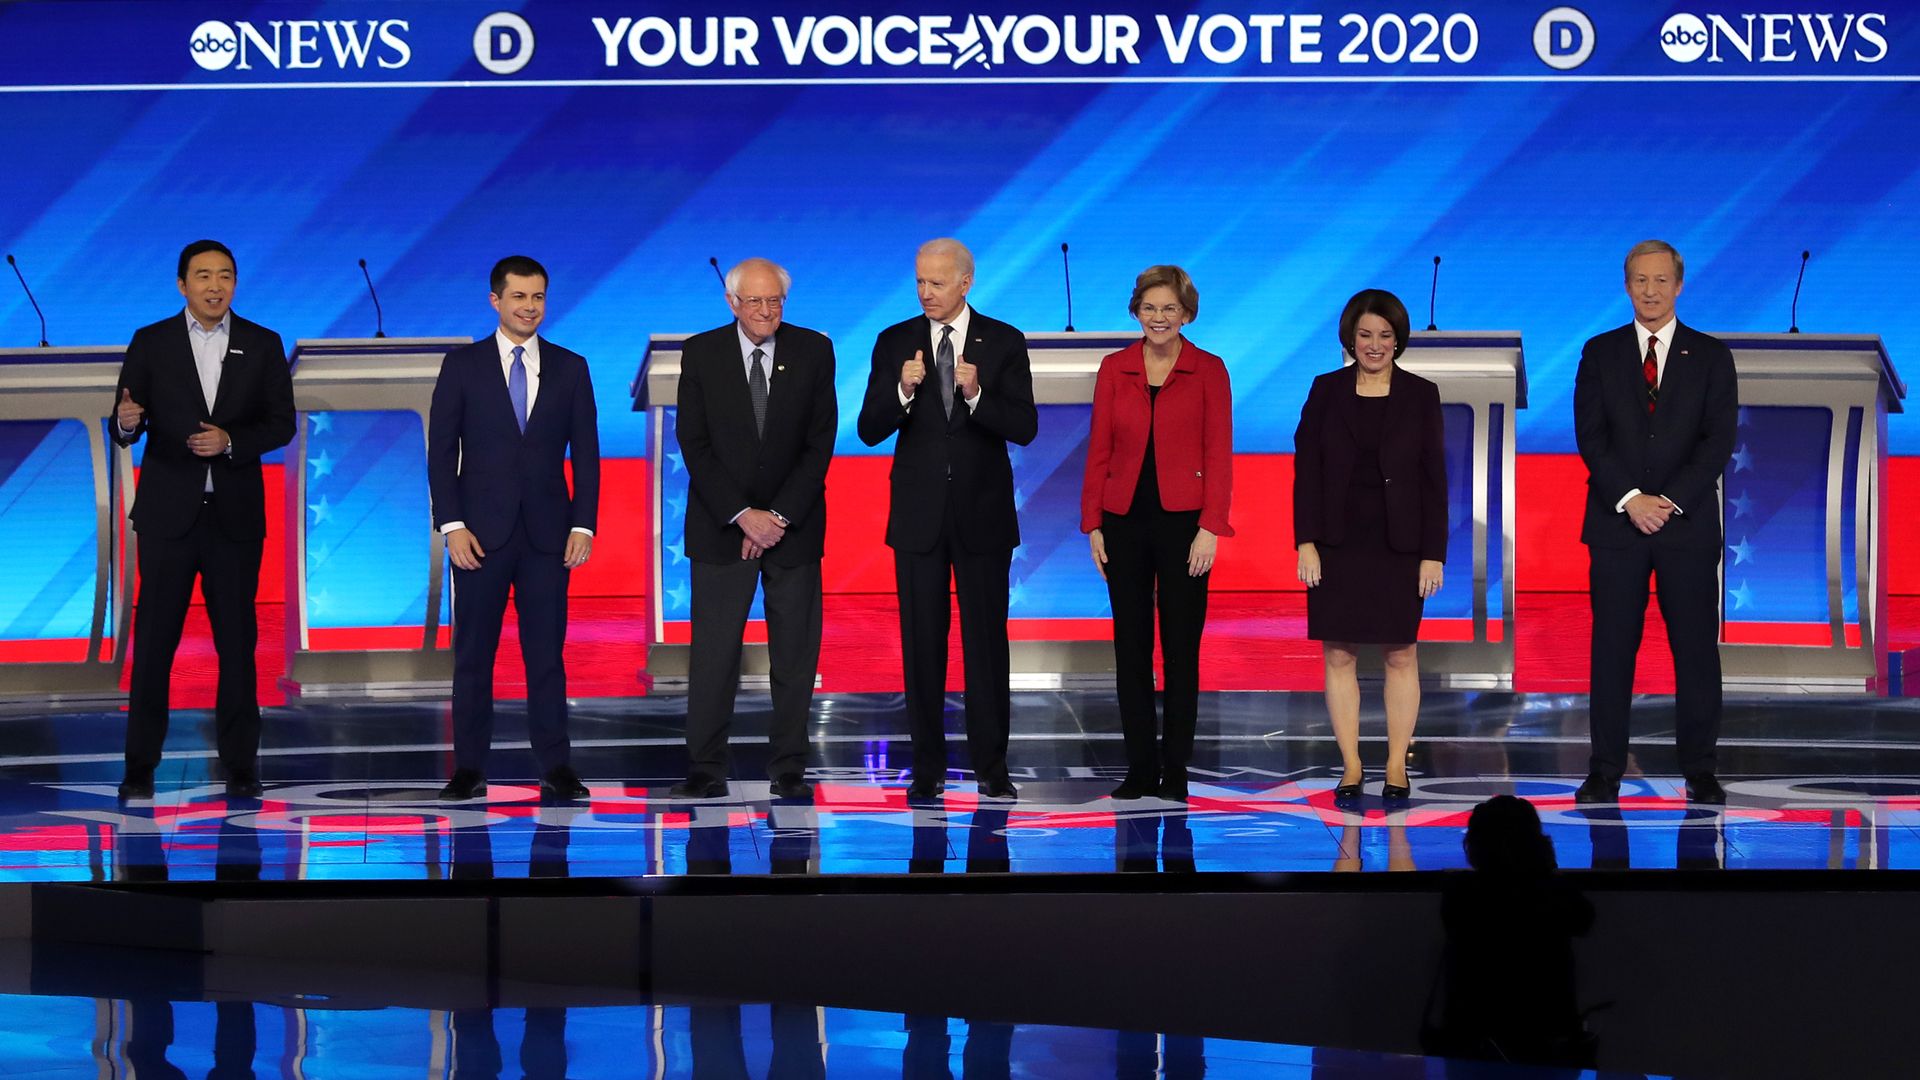 Seven Democratic presidential candidates line up on stage before the debate in New Hampshire.